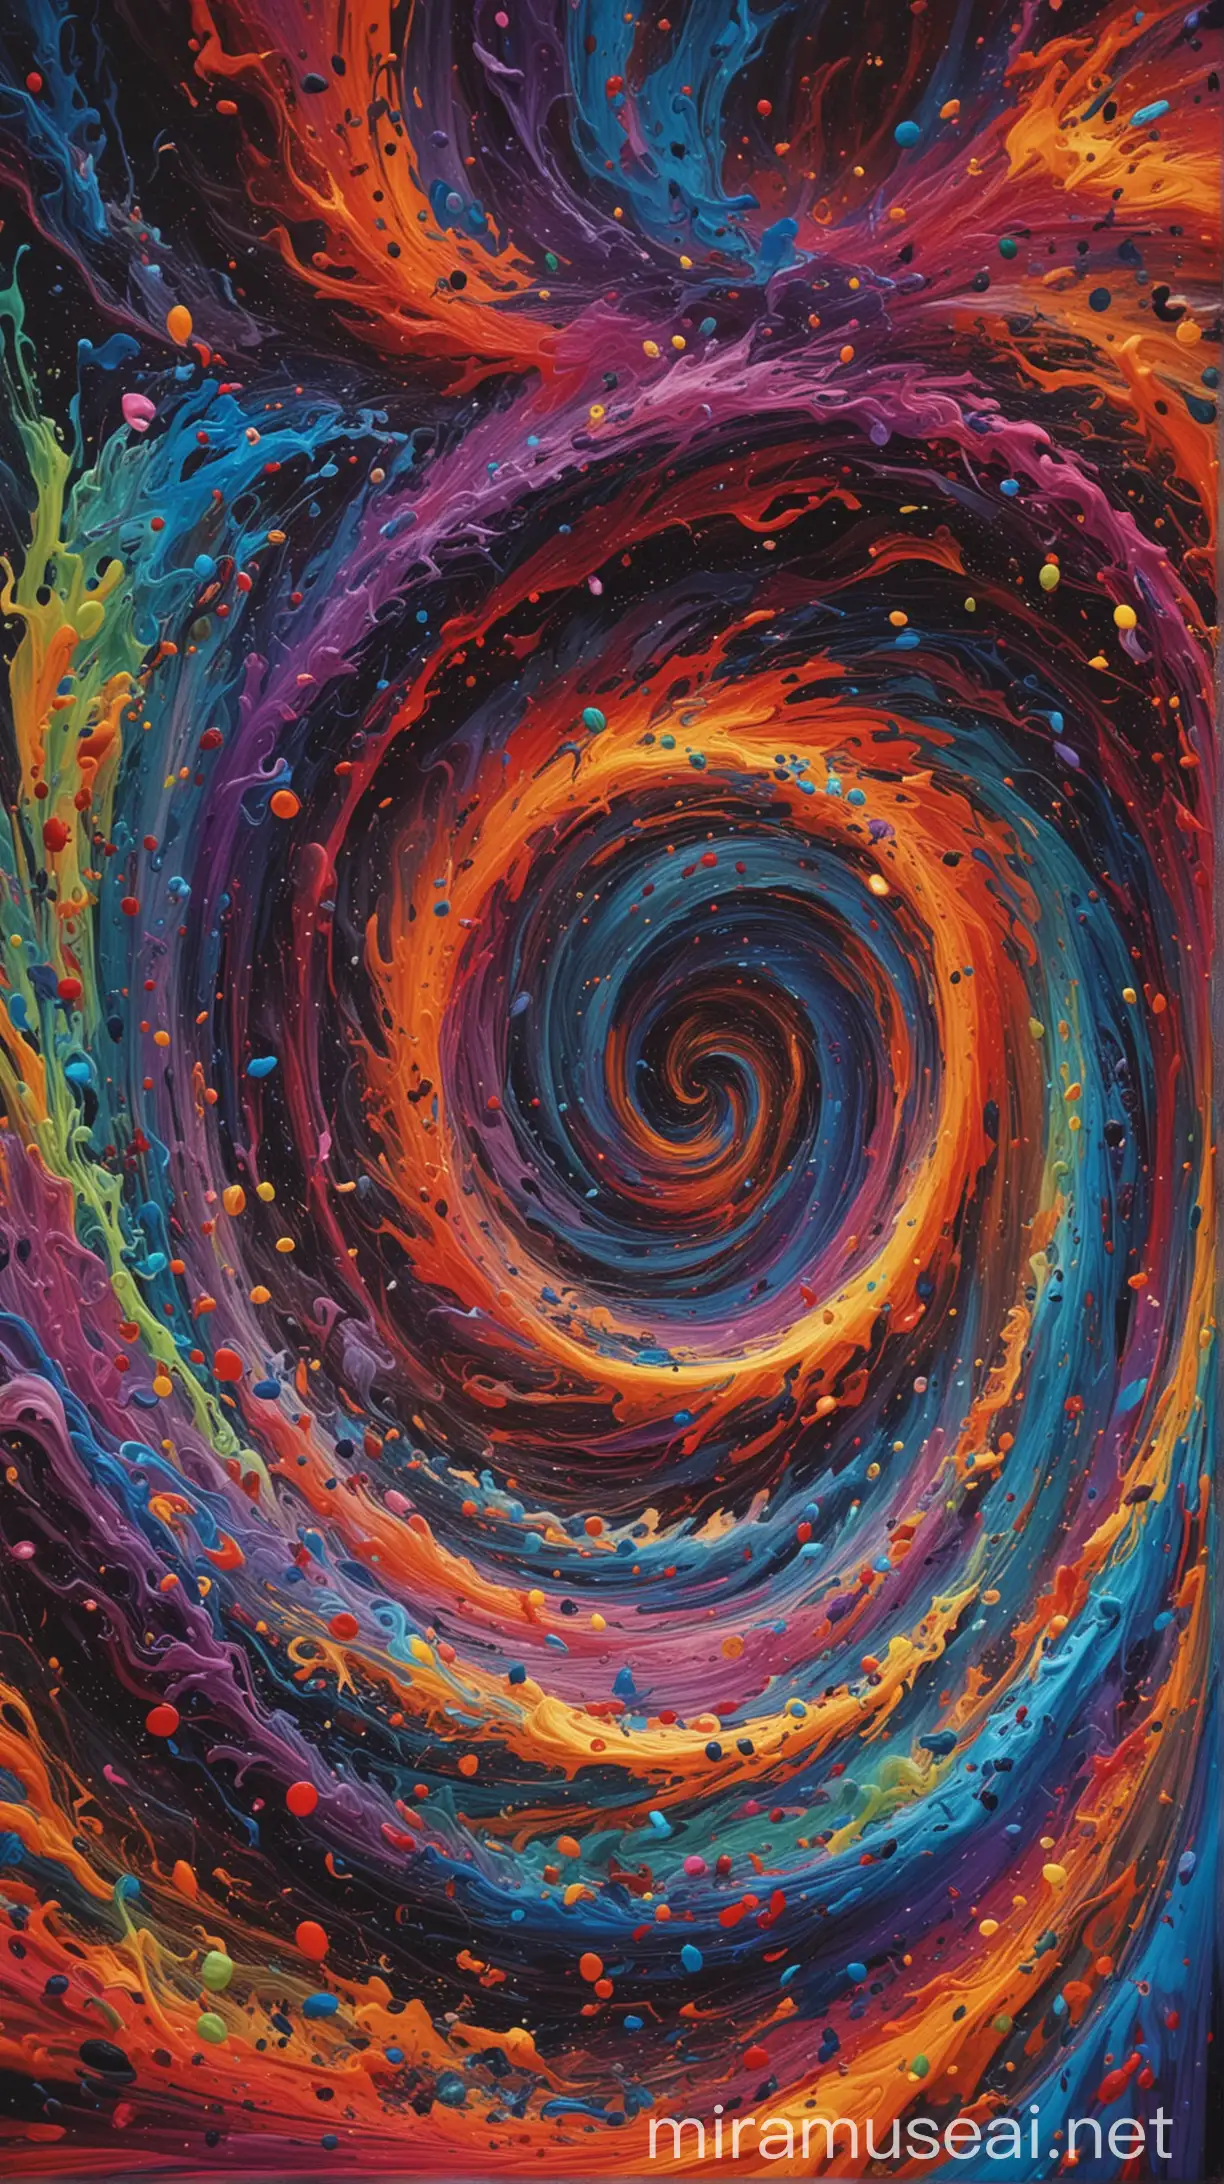 A swirling vortex of colors, representing the void and chaos.
. hyper realistic